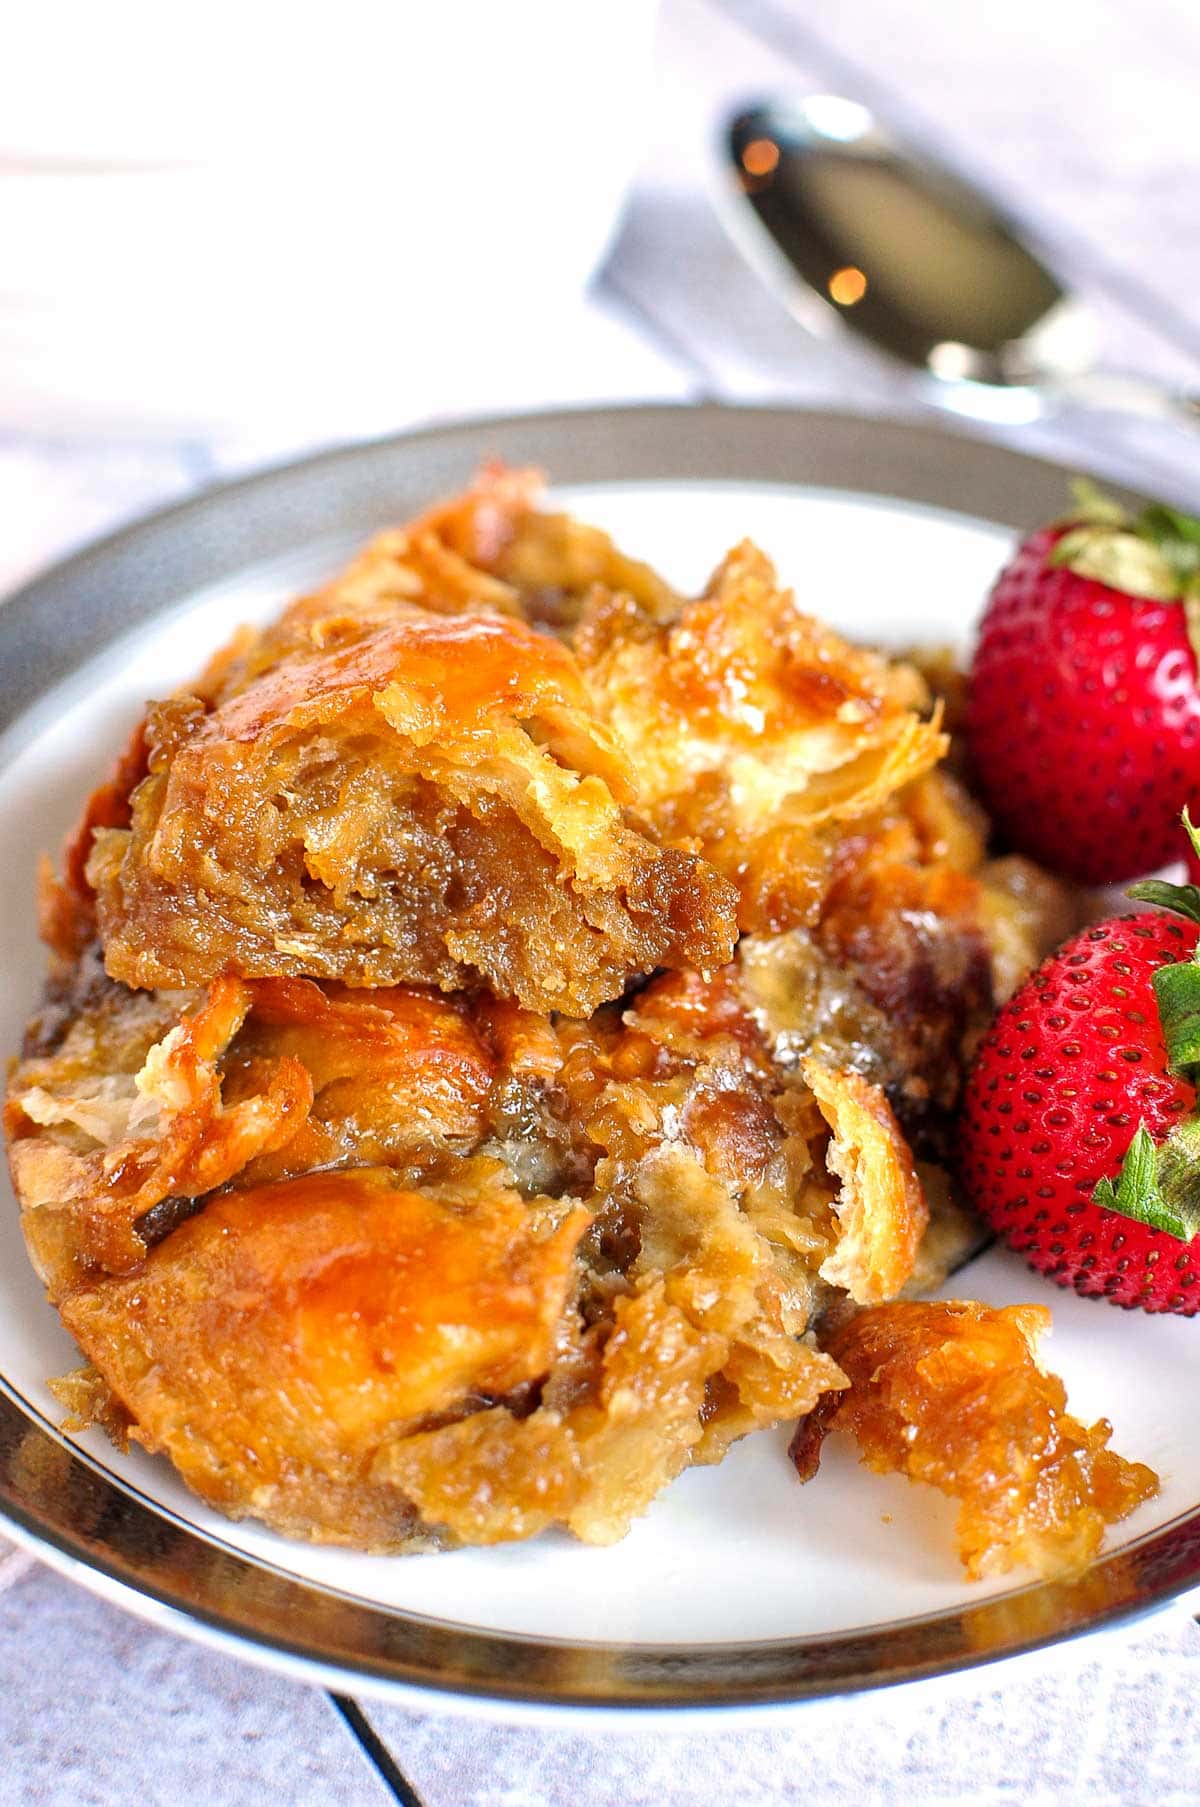 Serving of Croissant Bread Pudding on plate.